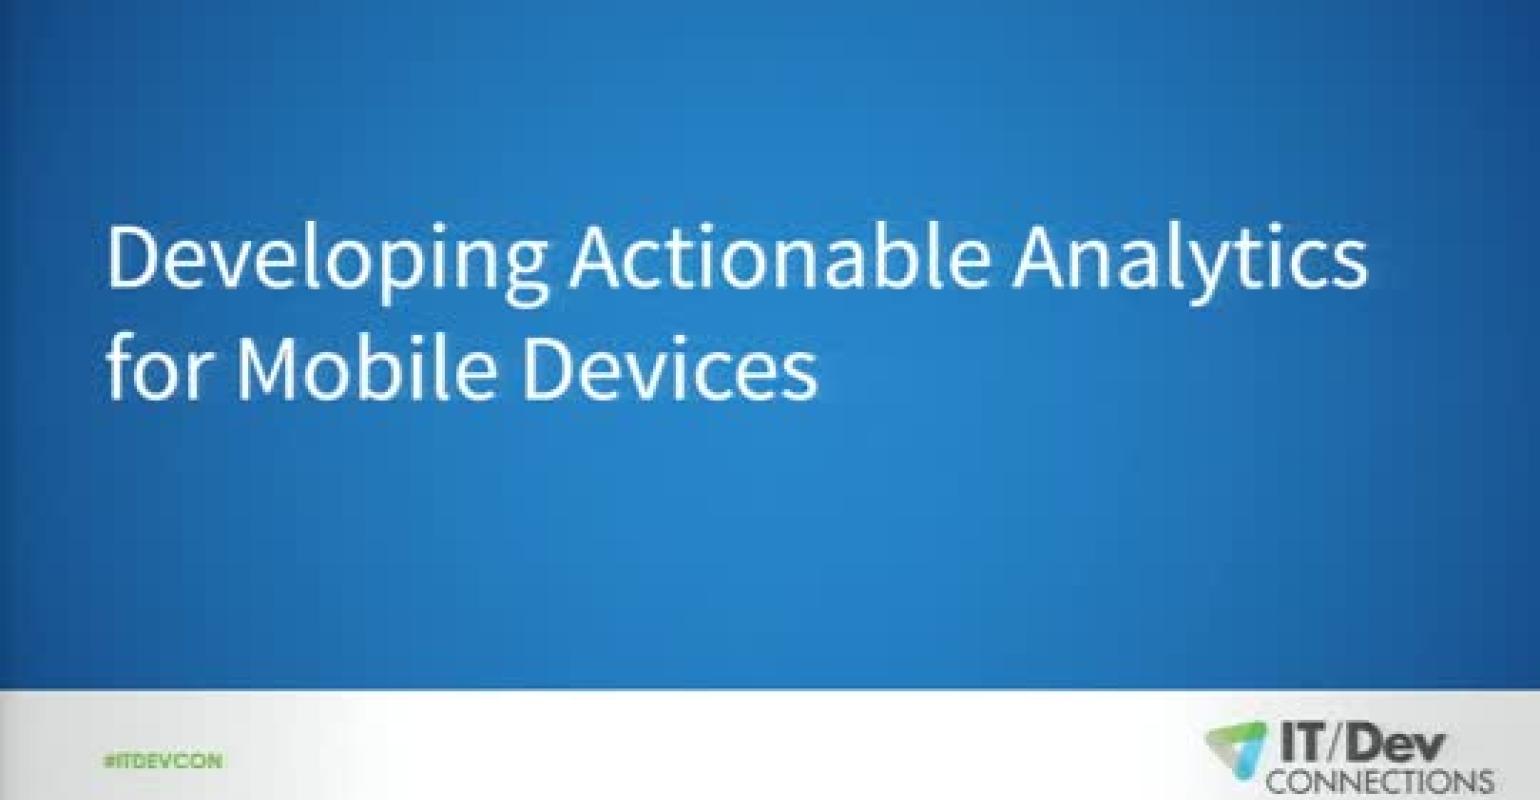 Developing Actionable Analytics for Mobile Devices